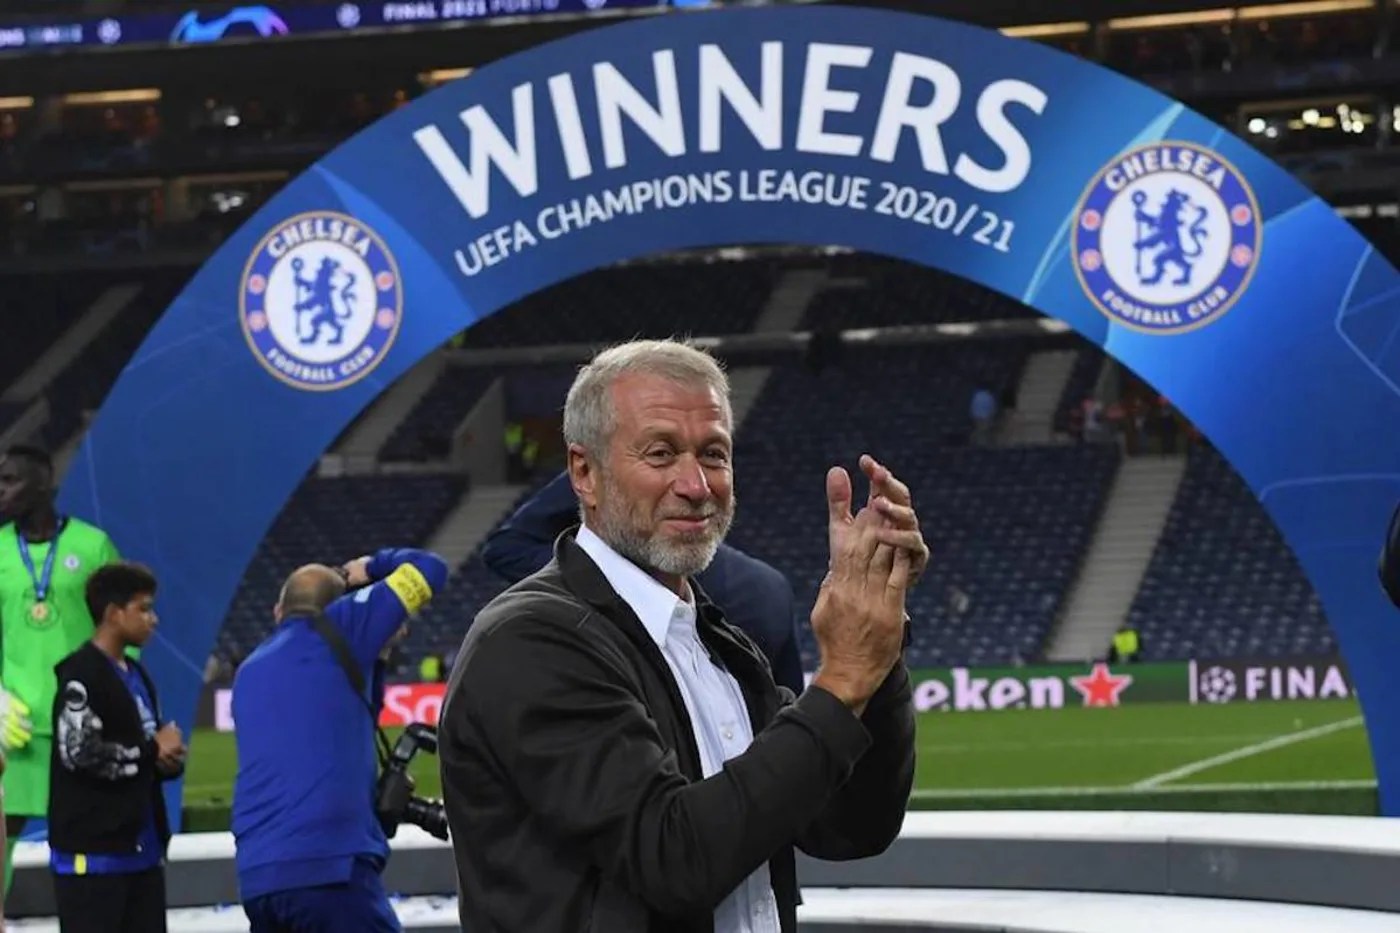 Chelsea Takeover Live Updates: Portugal approves sale of Chelsea FC by Roman Abramovich, British Government approved takeover to Todd Boehly - Check out